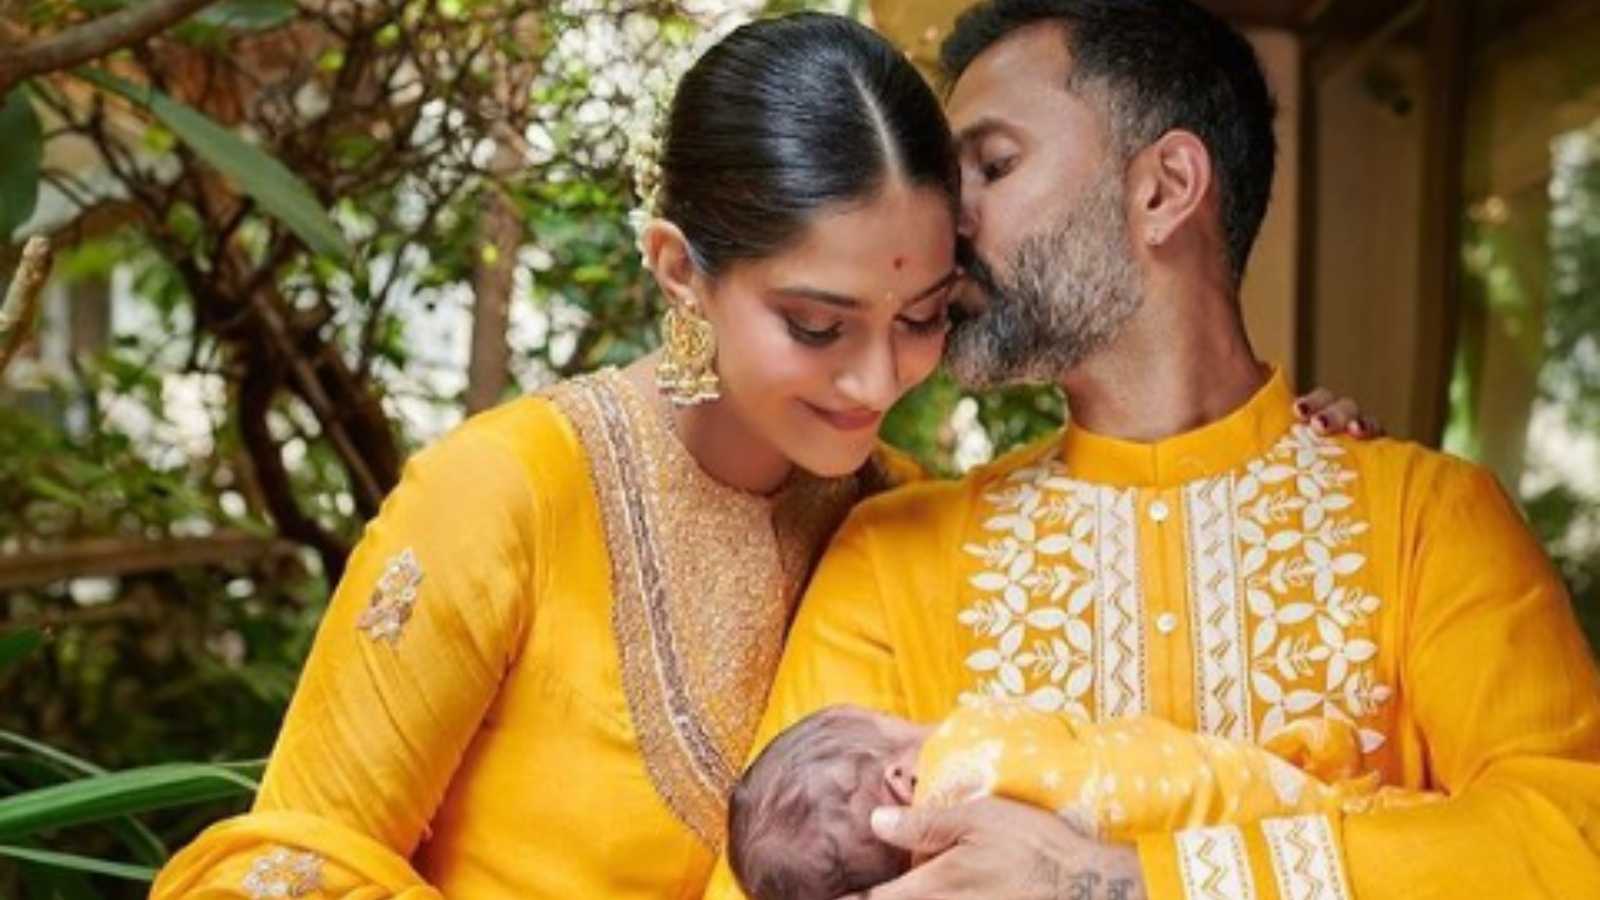 Sonam Kapoor and Anand Ahuja name their newborn son Vayu, explain the mythological significance of the name